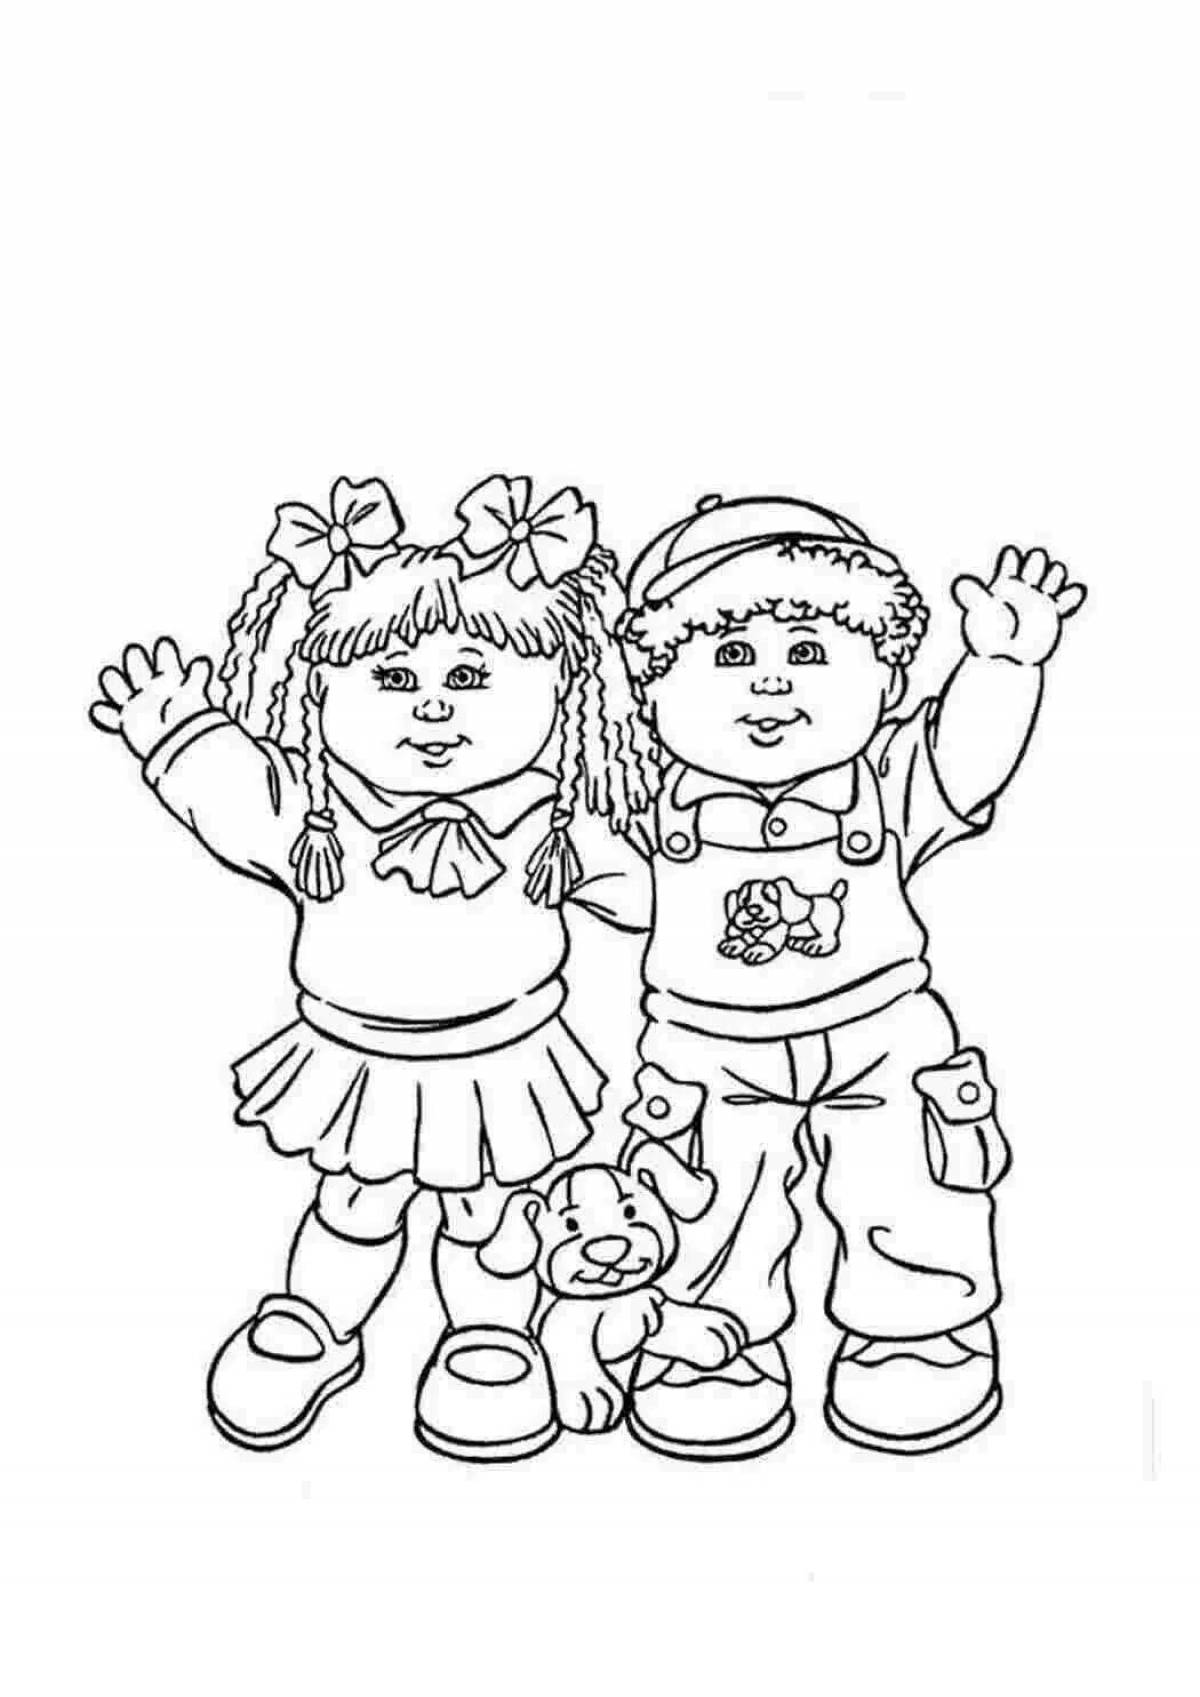 Exotic coloring drawing of a girl and a boy